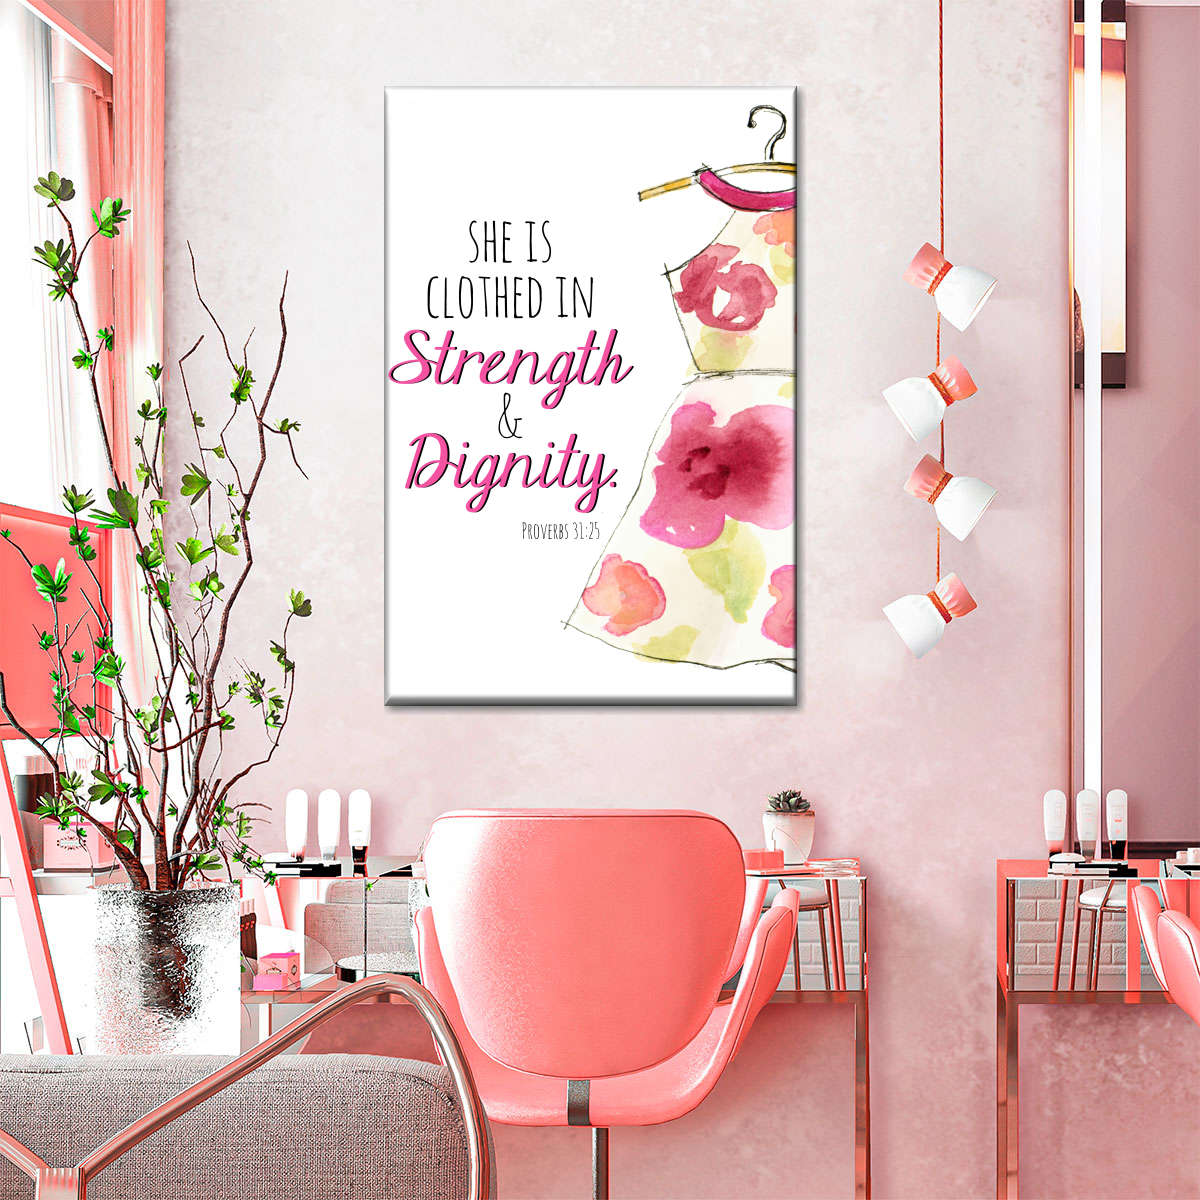 Strength And Dignity Wall Art Canvas - Canvas Religious Wall Art - Christian Wall Decor Living Room